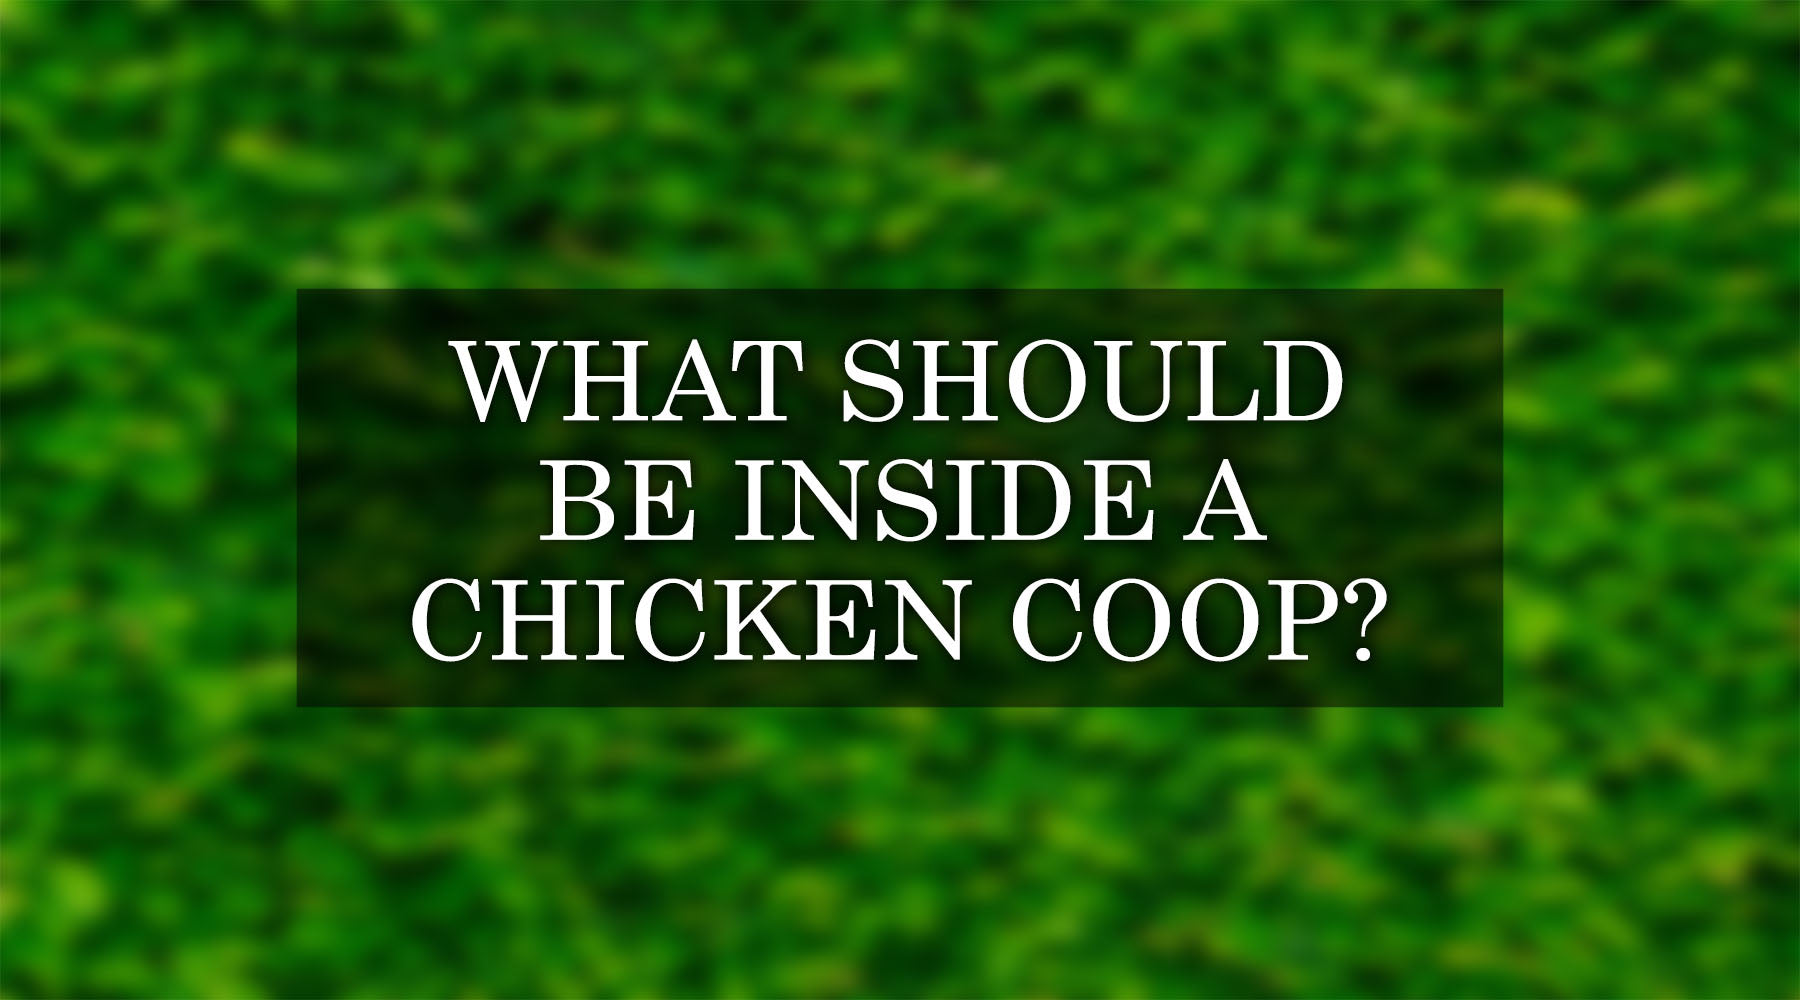 What Should Be Inside a Chicken Coop?